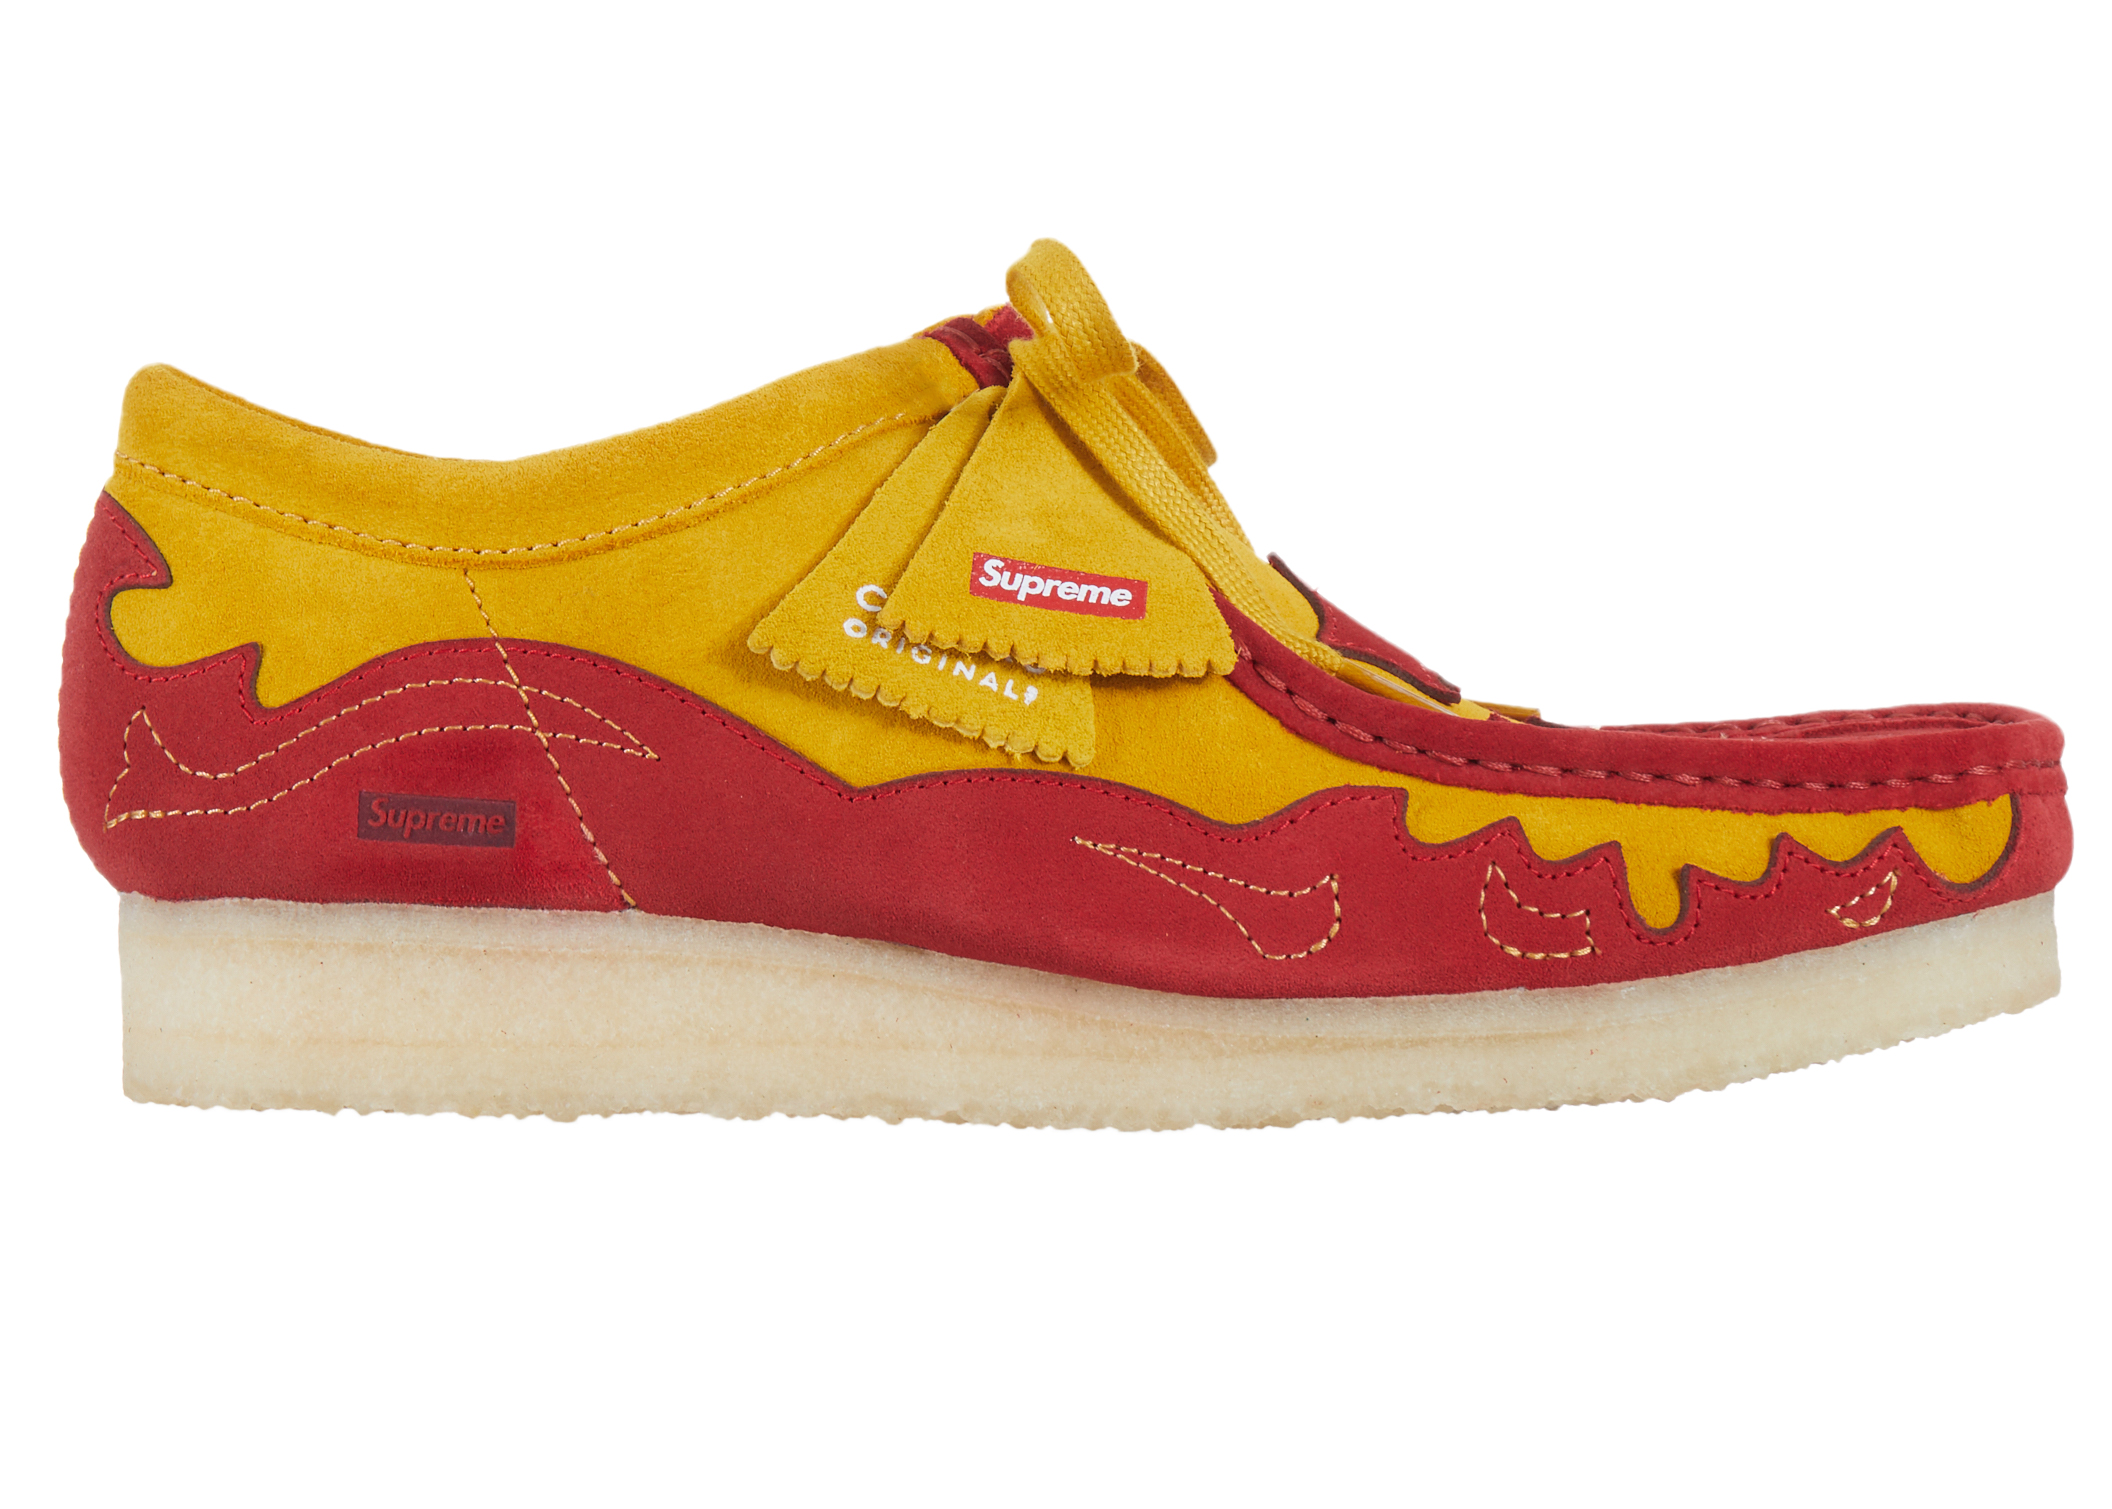 Supreme Clarks wallabee boots